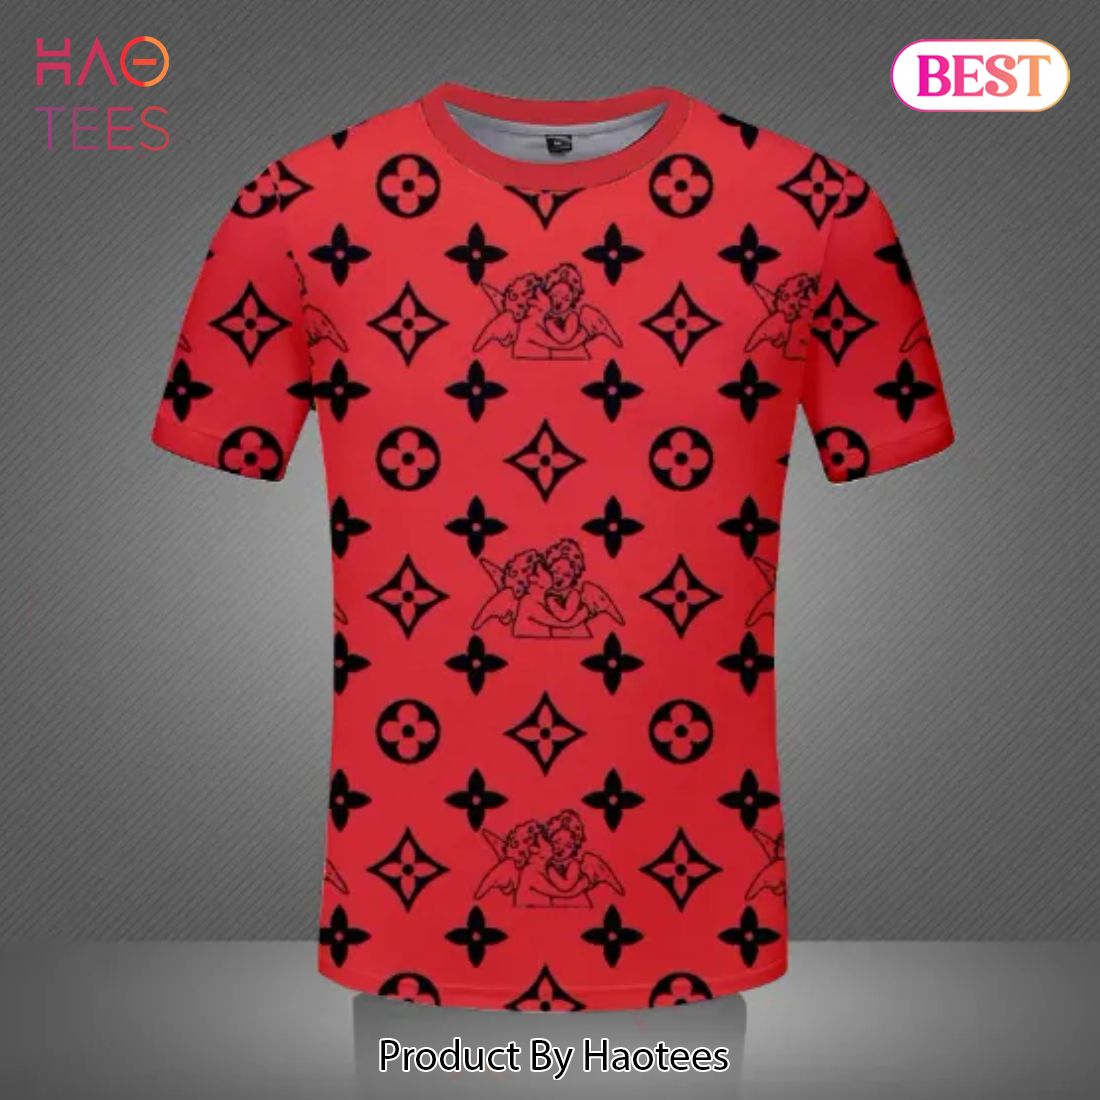 [NEW FASHION] Louis Vuitton Cupid Red Luxury Brand Premium T-Shirt Outfit For Men Women